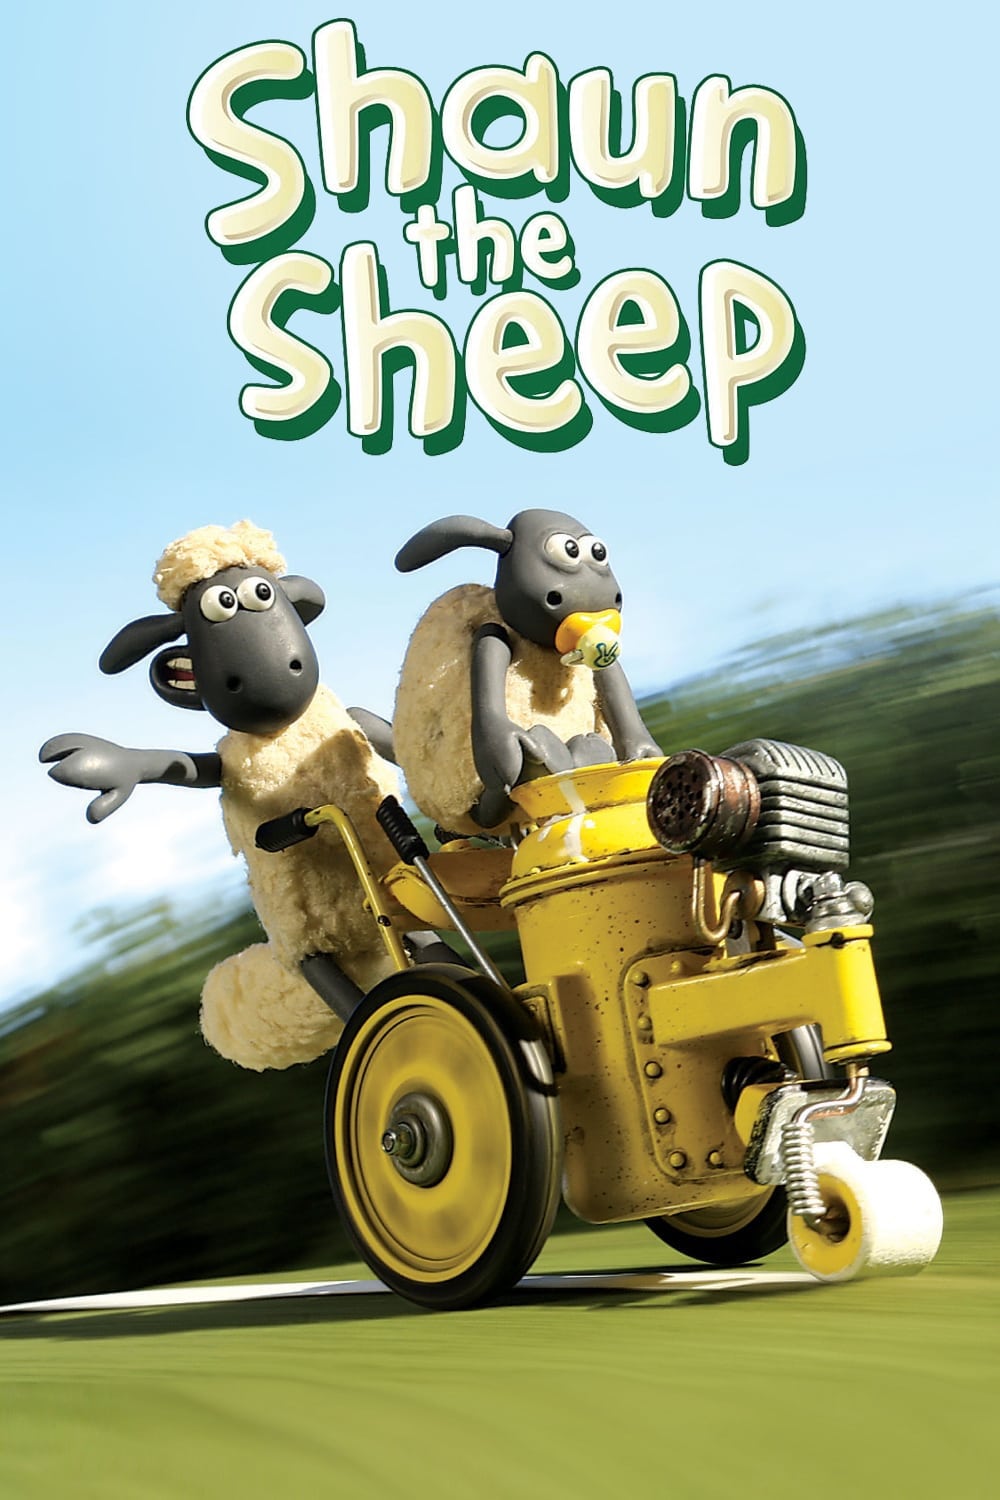 Shaun the Sheep TV Shows About Countryside